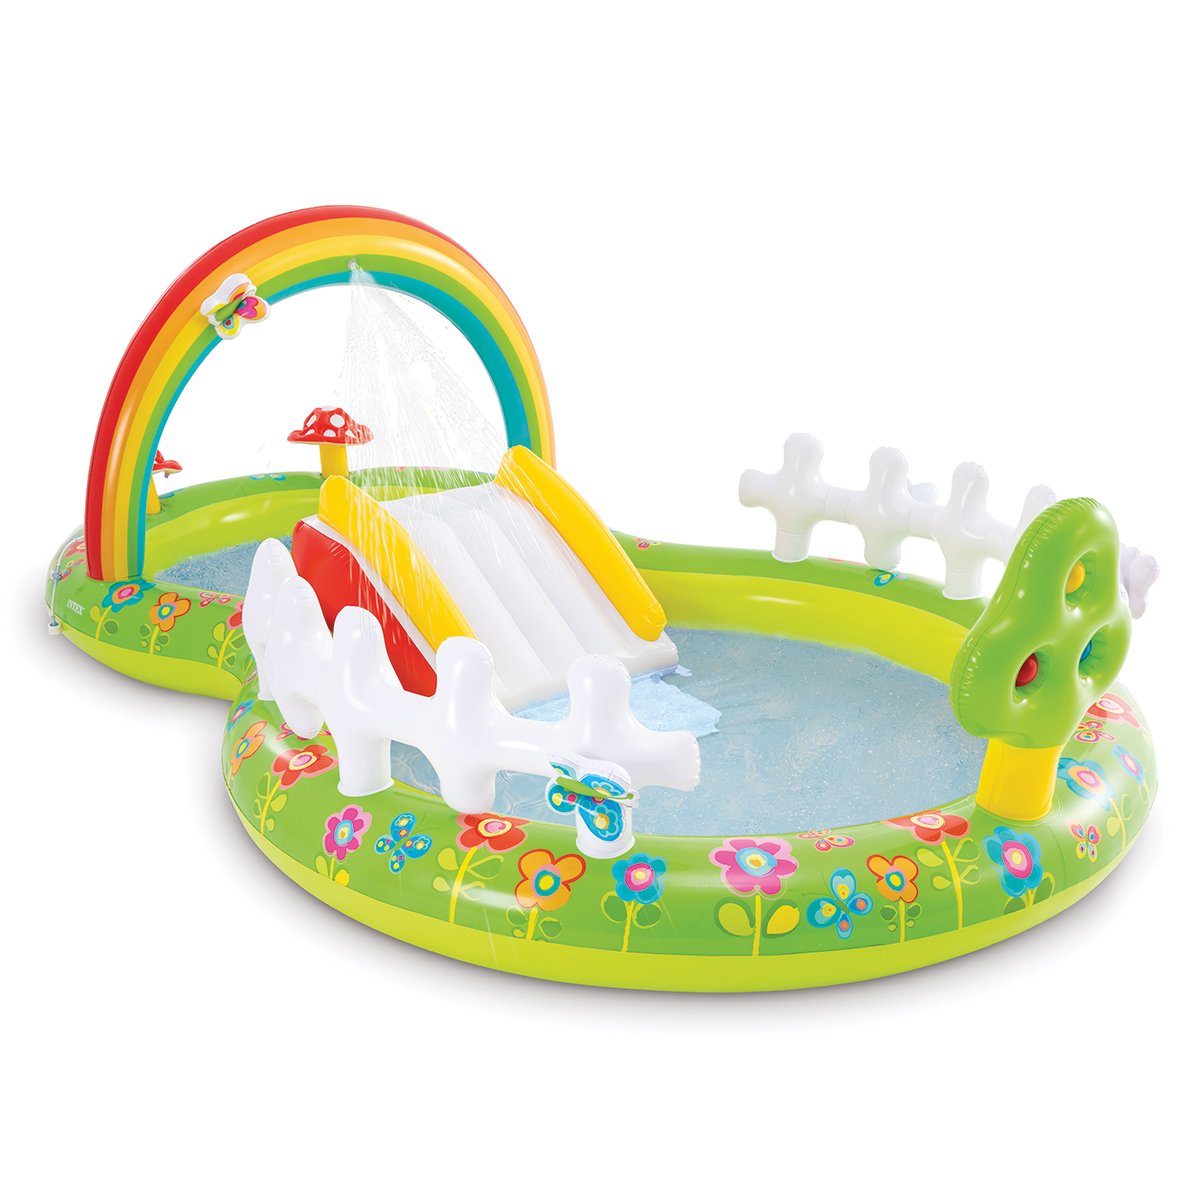 Intex 57154NP Inflatable Garden Kids Play Centre Water Slide Pool 2